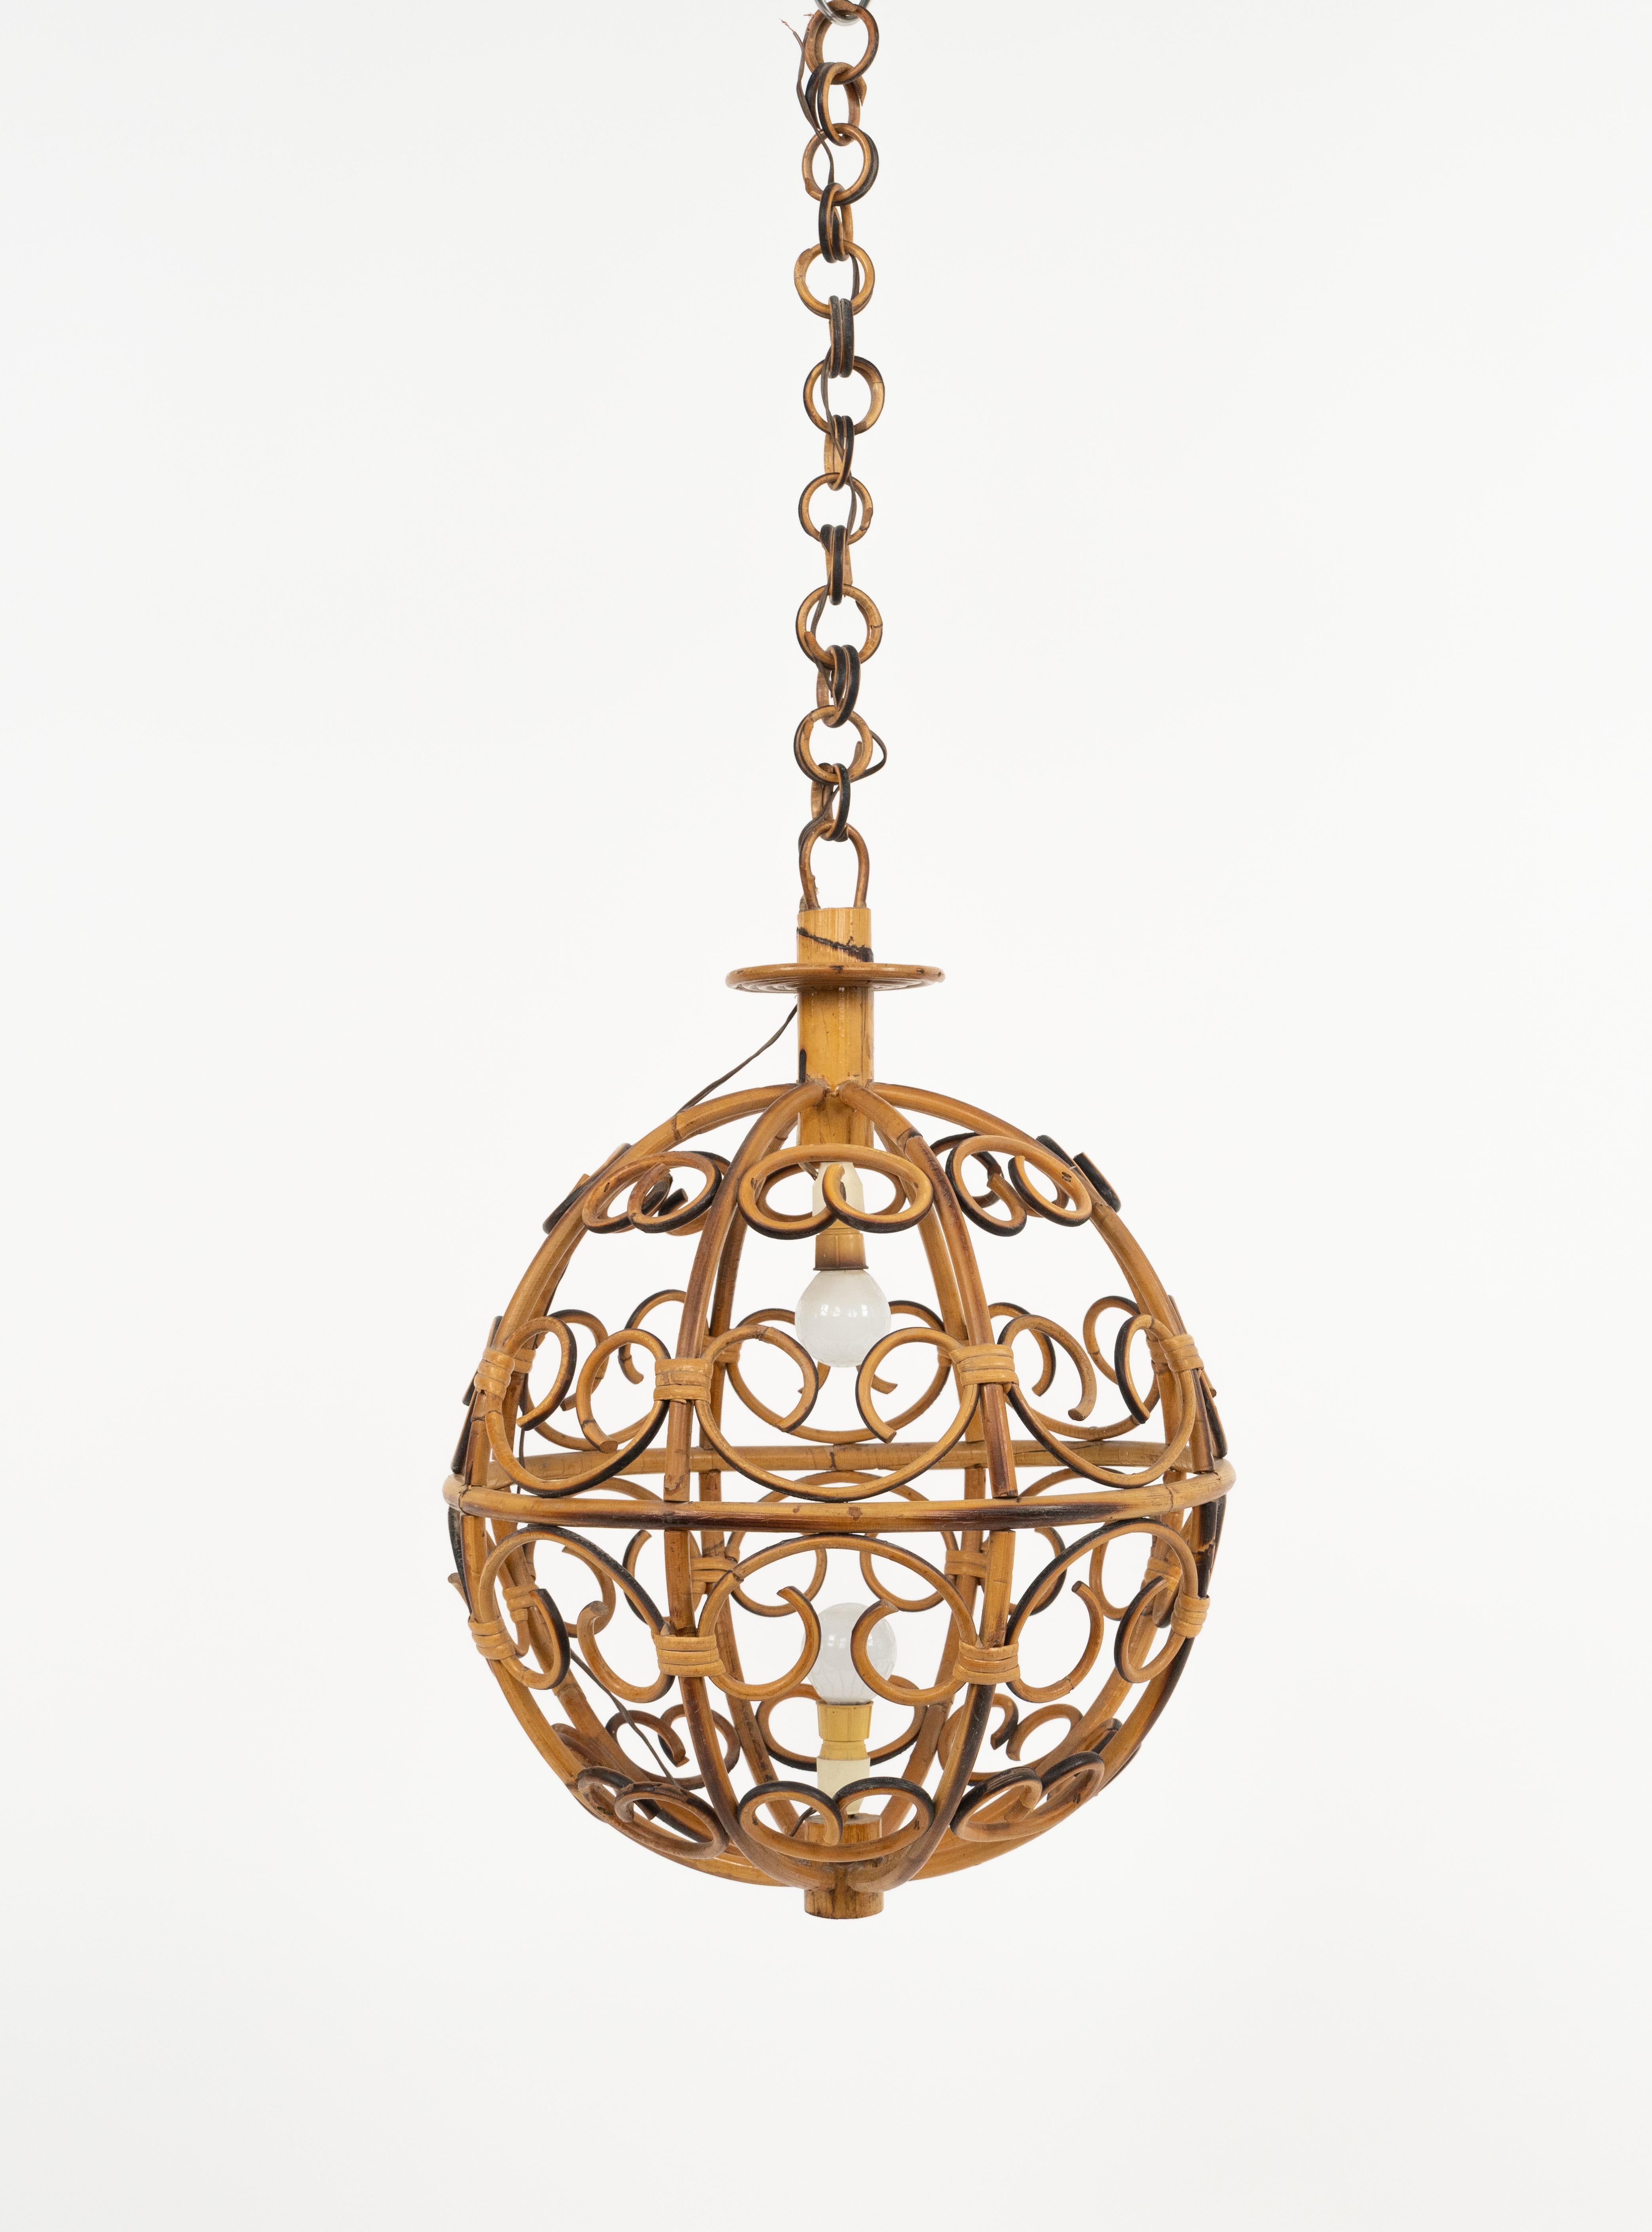 Midcentury beautiful chandelier ball shaped.

Made in Italy in the 1960s.

This suspension lamp is entirely handcrafted with rattan and bamboo. 

The ball shaped shade hangs from a chain with round rattan links which can be shortened to adjust it to